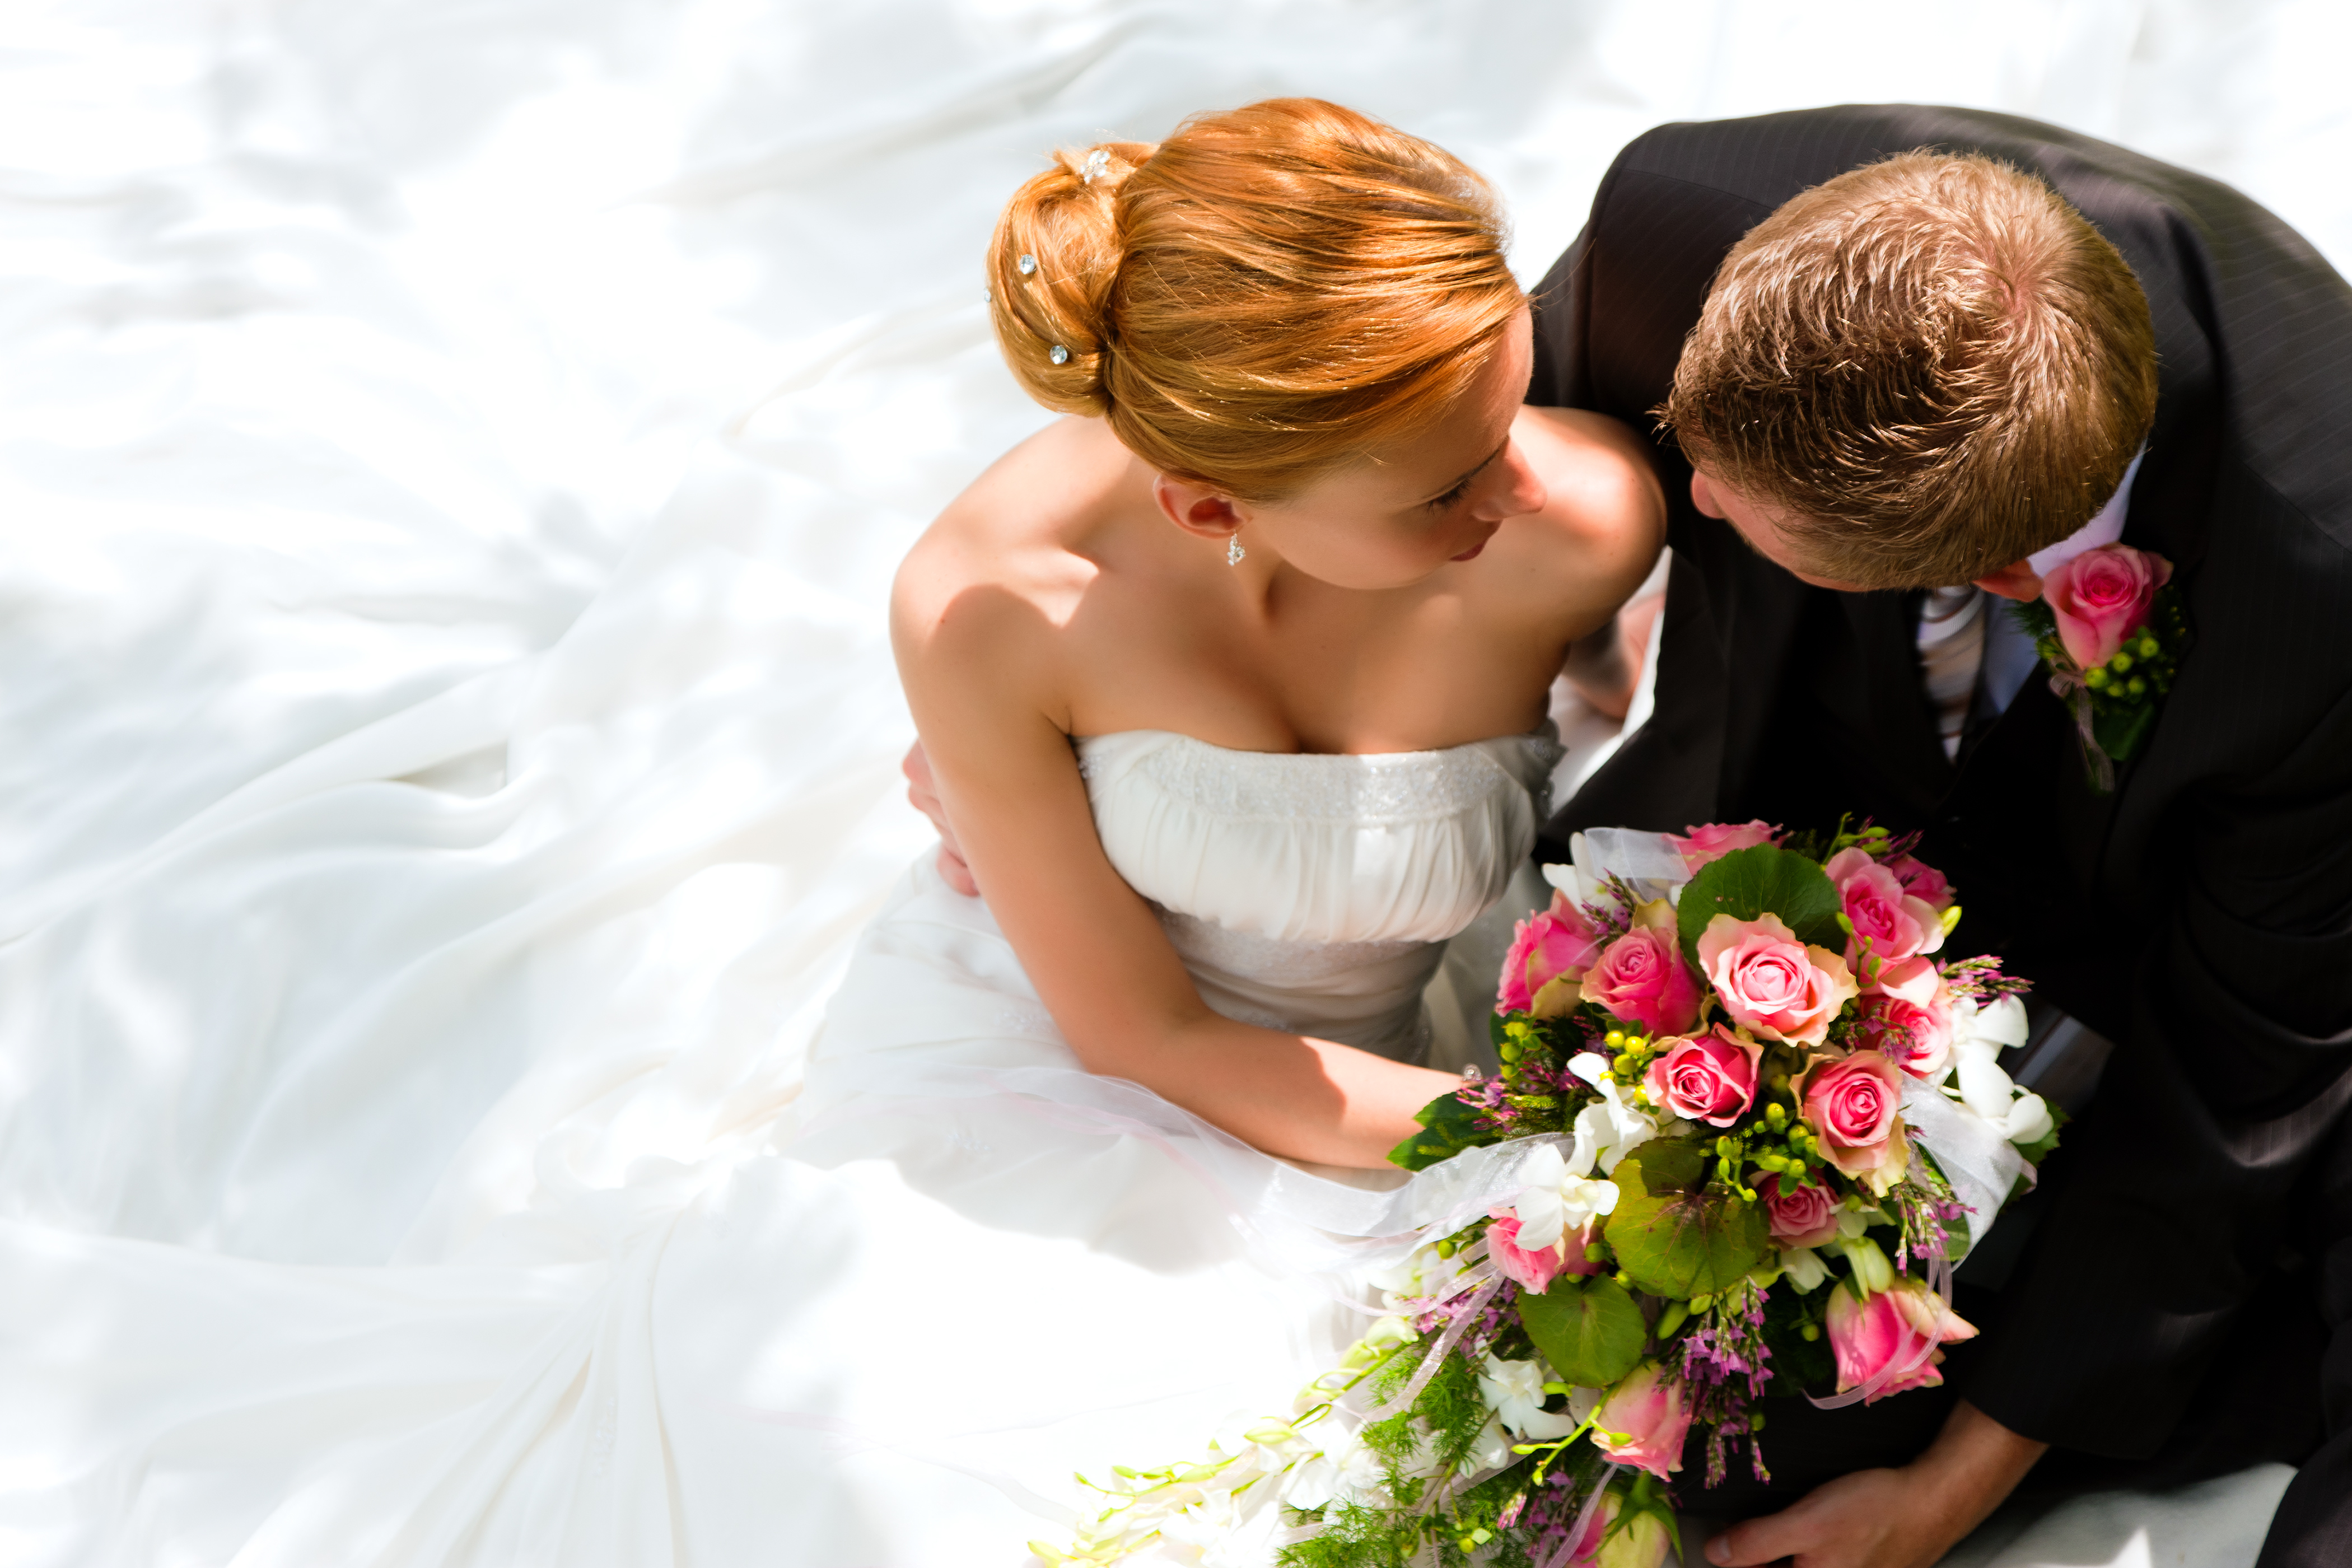 A groom holding a flower bouquet is pictured sitting beside his bride | Source: Shutterstock